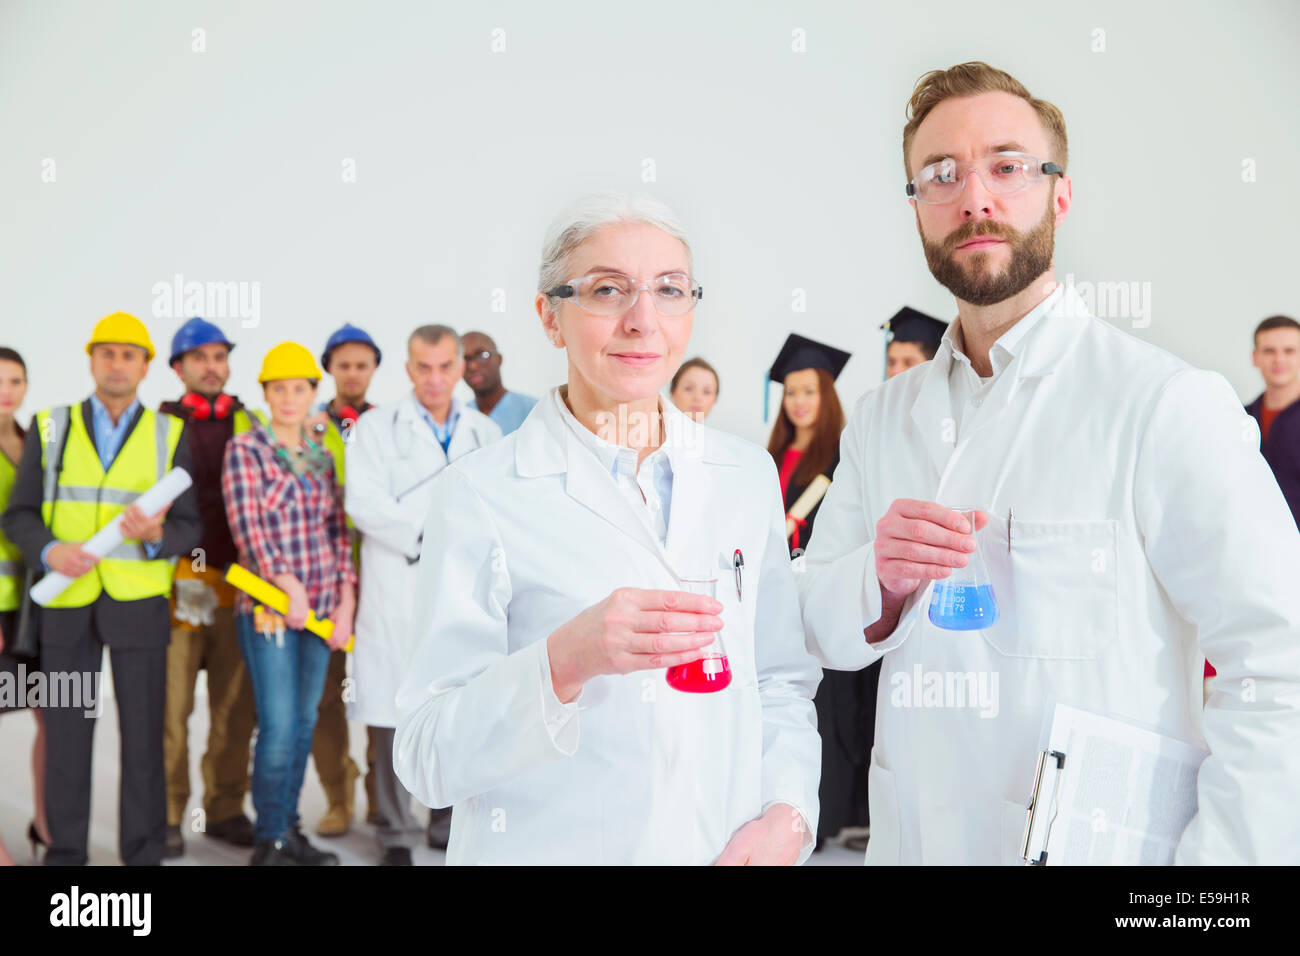 Portrait of scientists with workforce in background Stock Photo